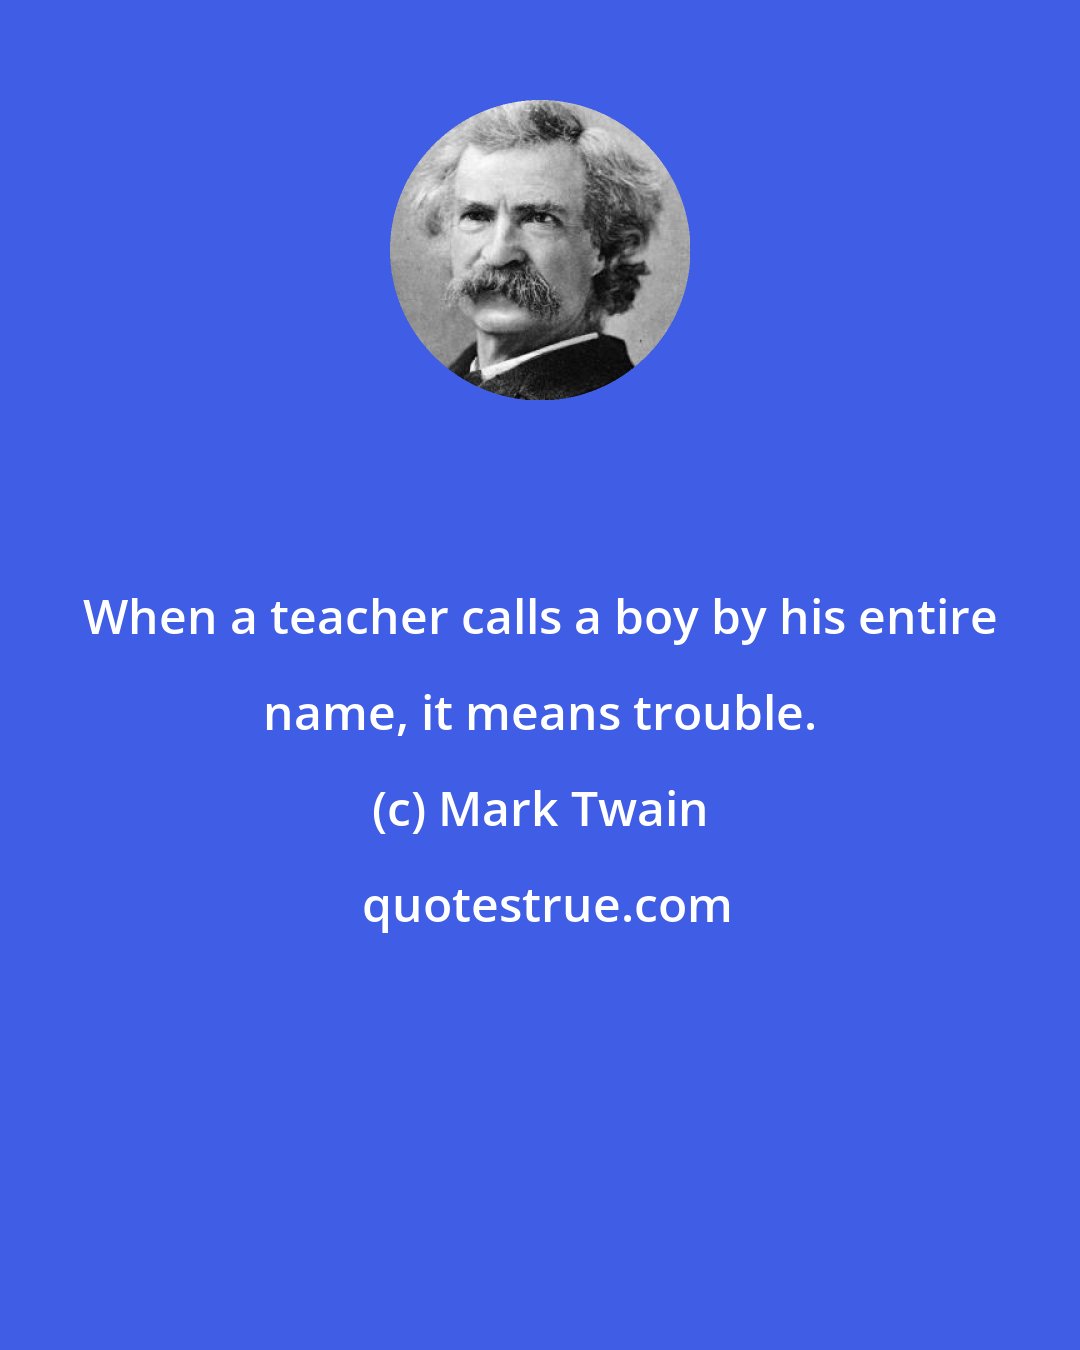 Mark Twain: When a teacher calls a boy by his entire name, it means trouble.